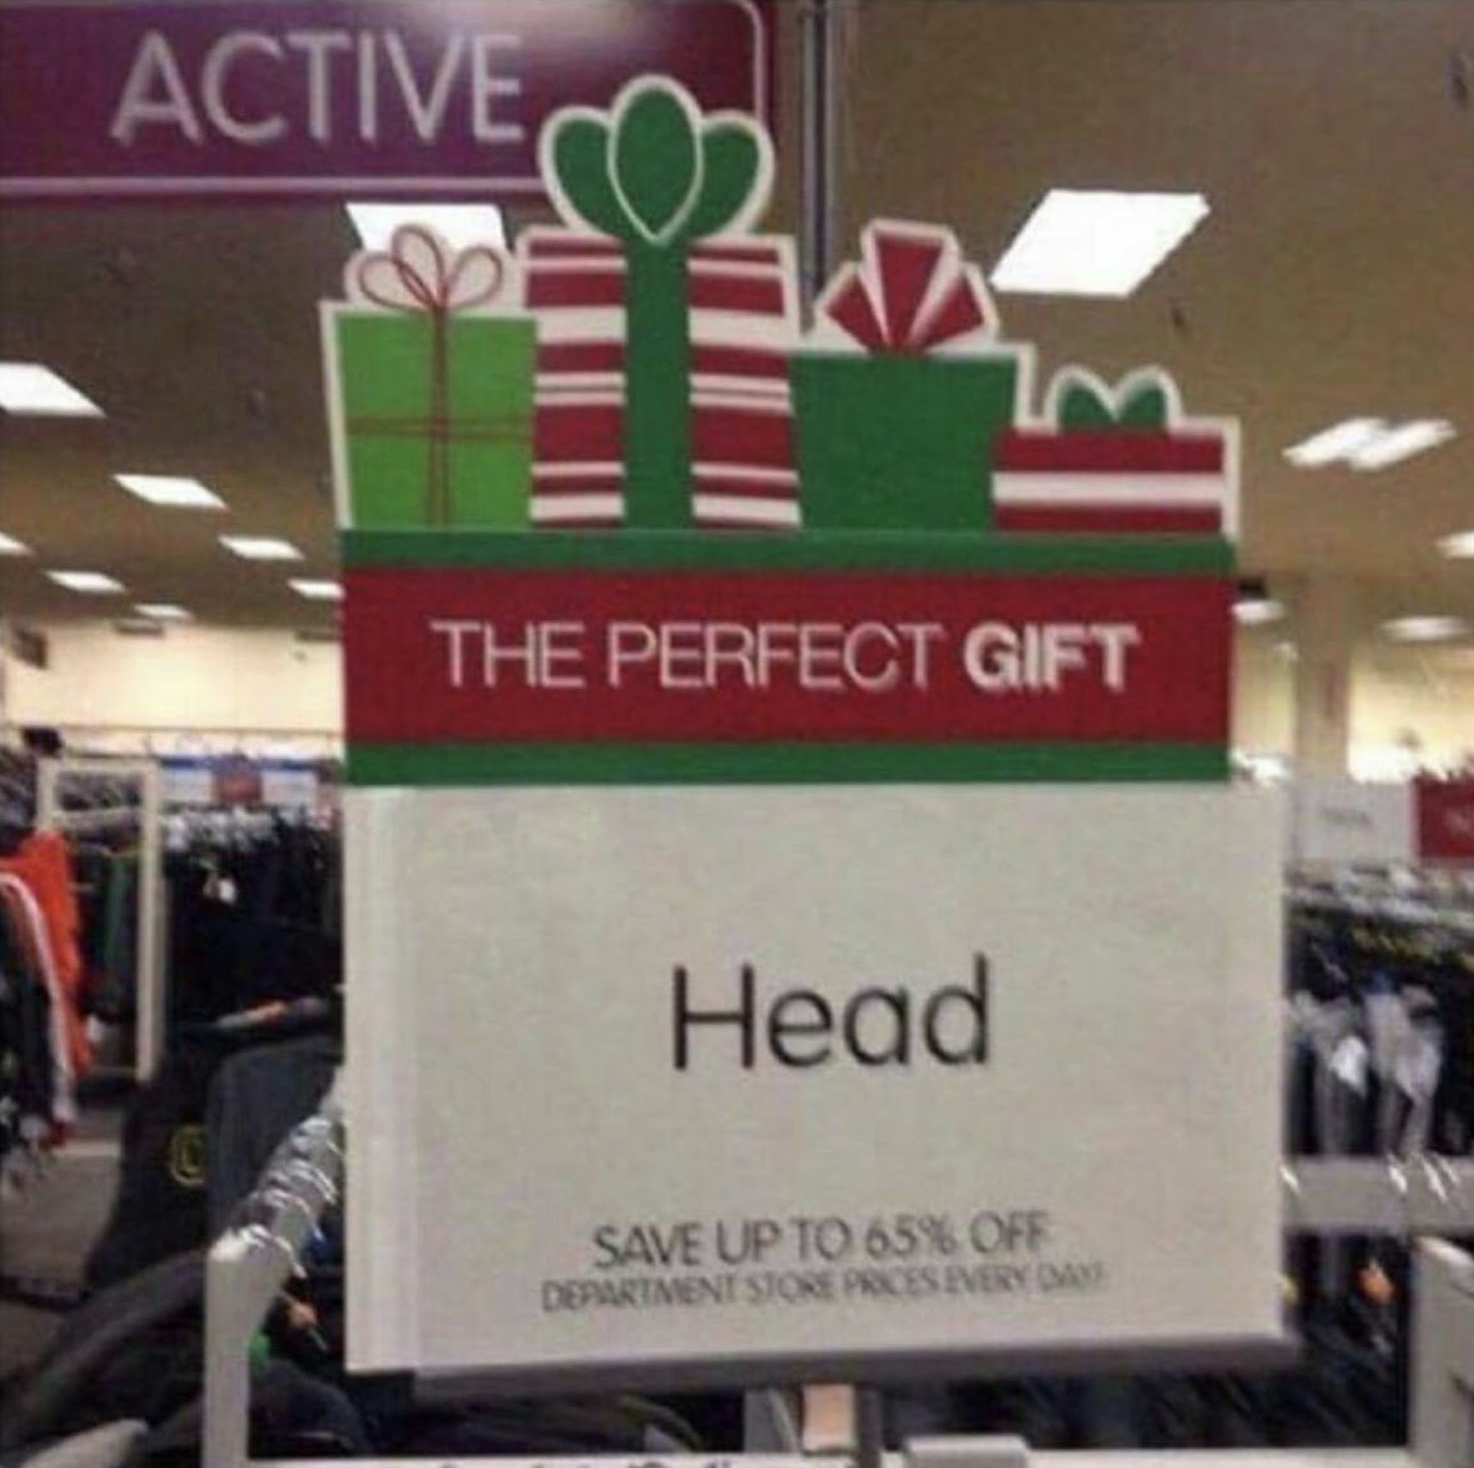 dank meme funny happy holidays meme - Active The Perfect Gift Head Save Up To 65% Off Department Store Paces